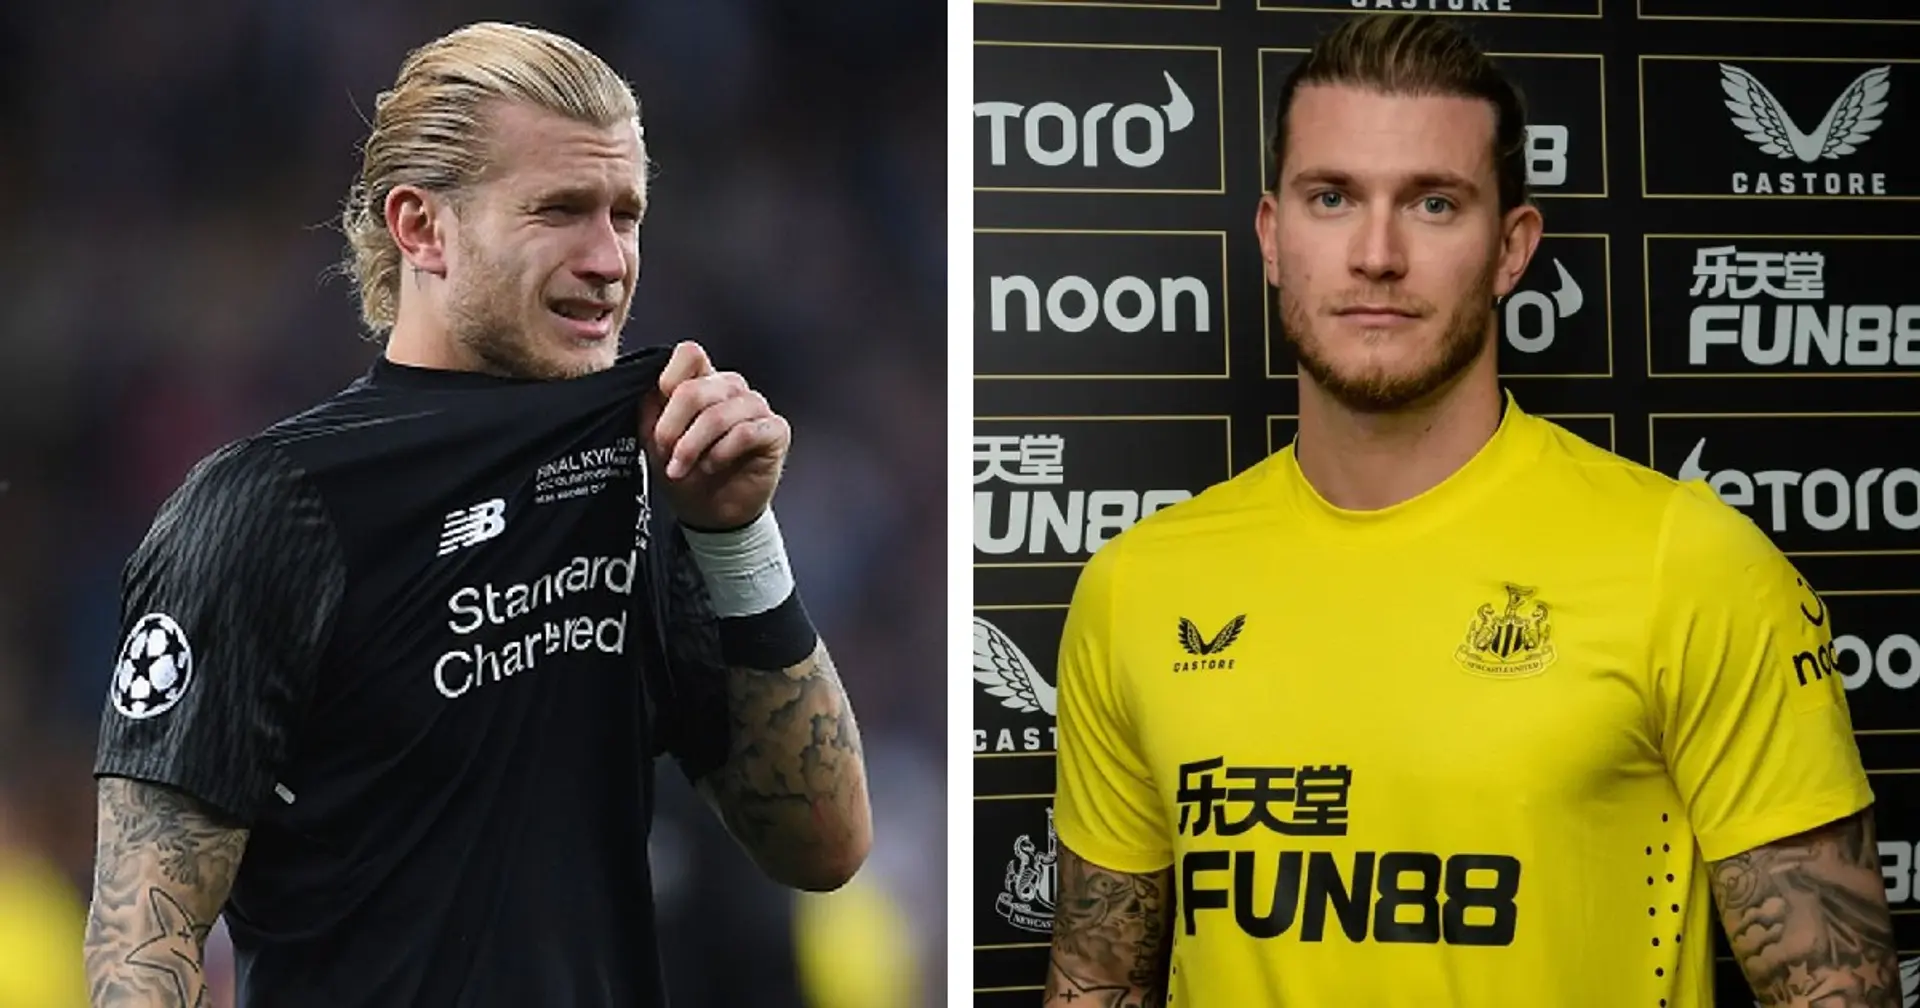 'It made me move to another club': Karius reflects on 2018 Champions League final errors